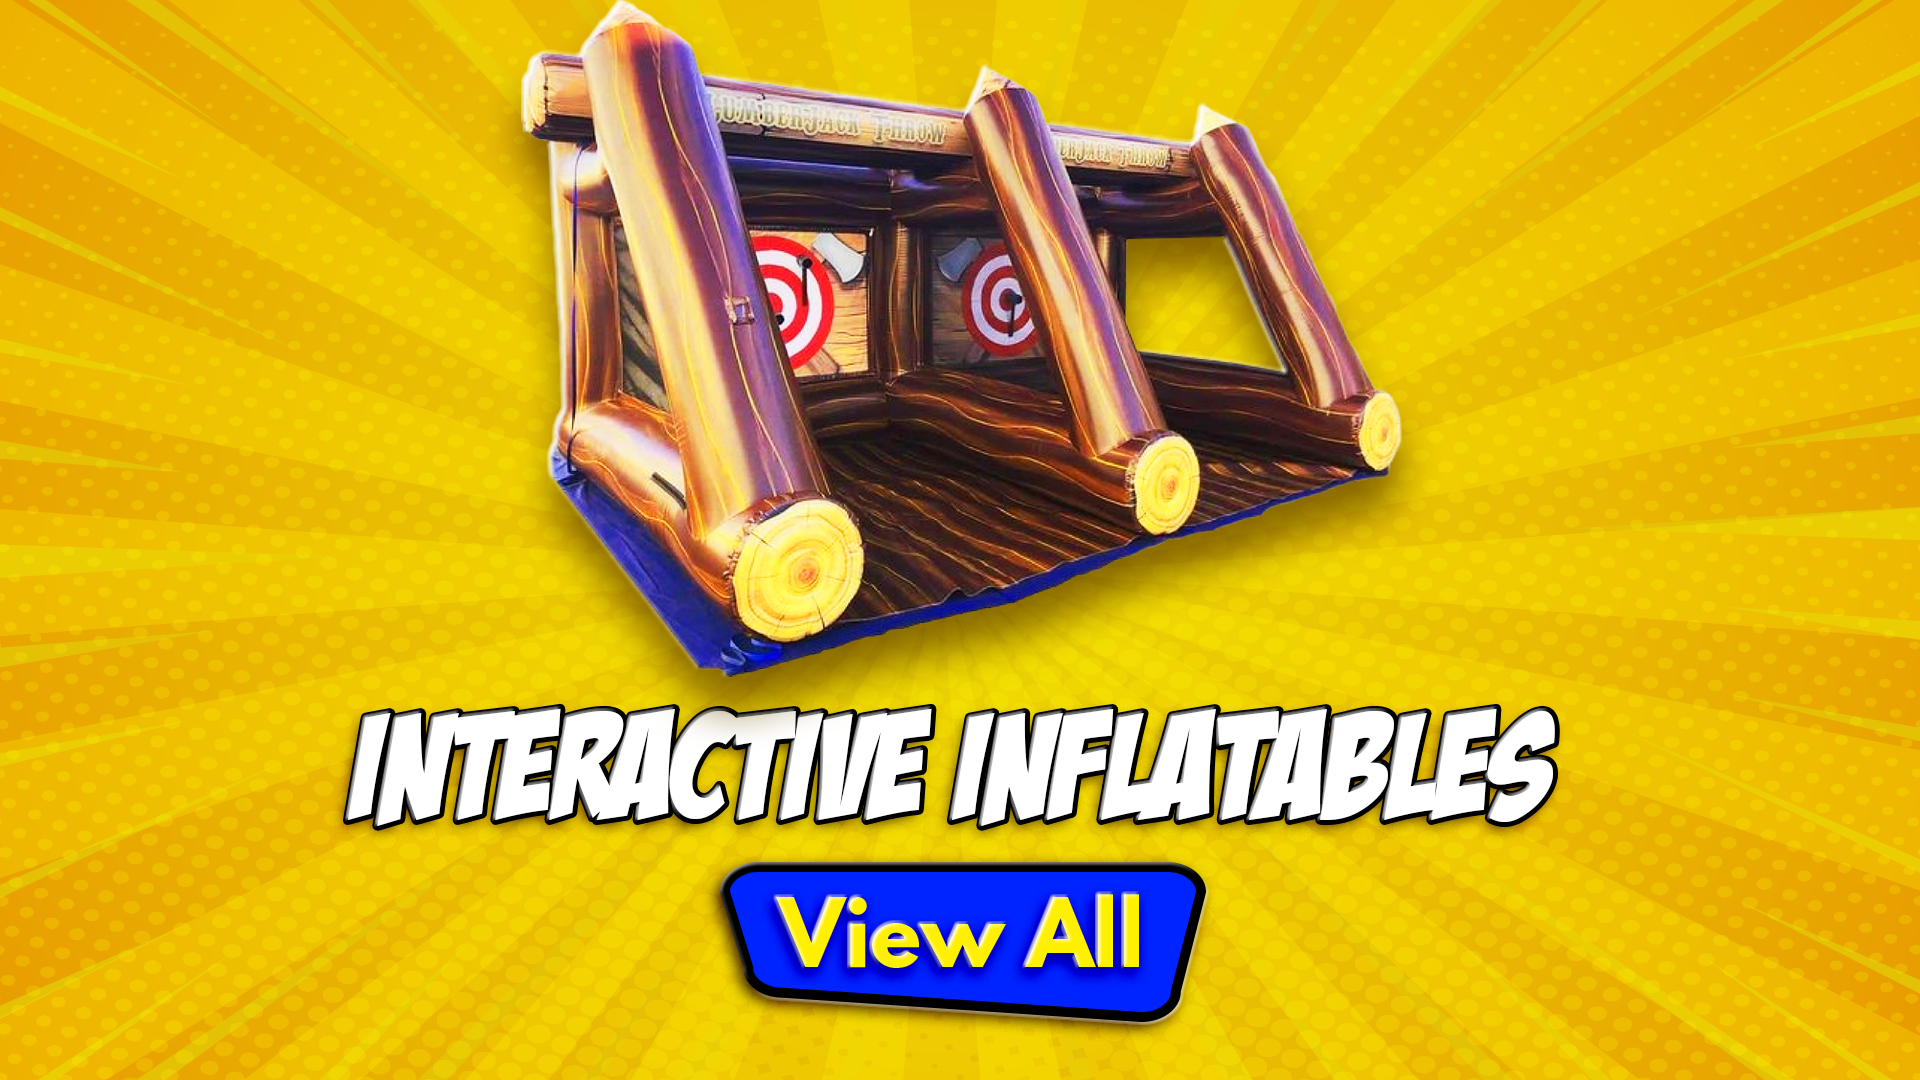 Union City Interactive Inflatable rentals